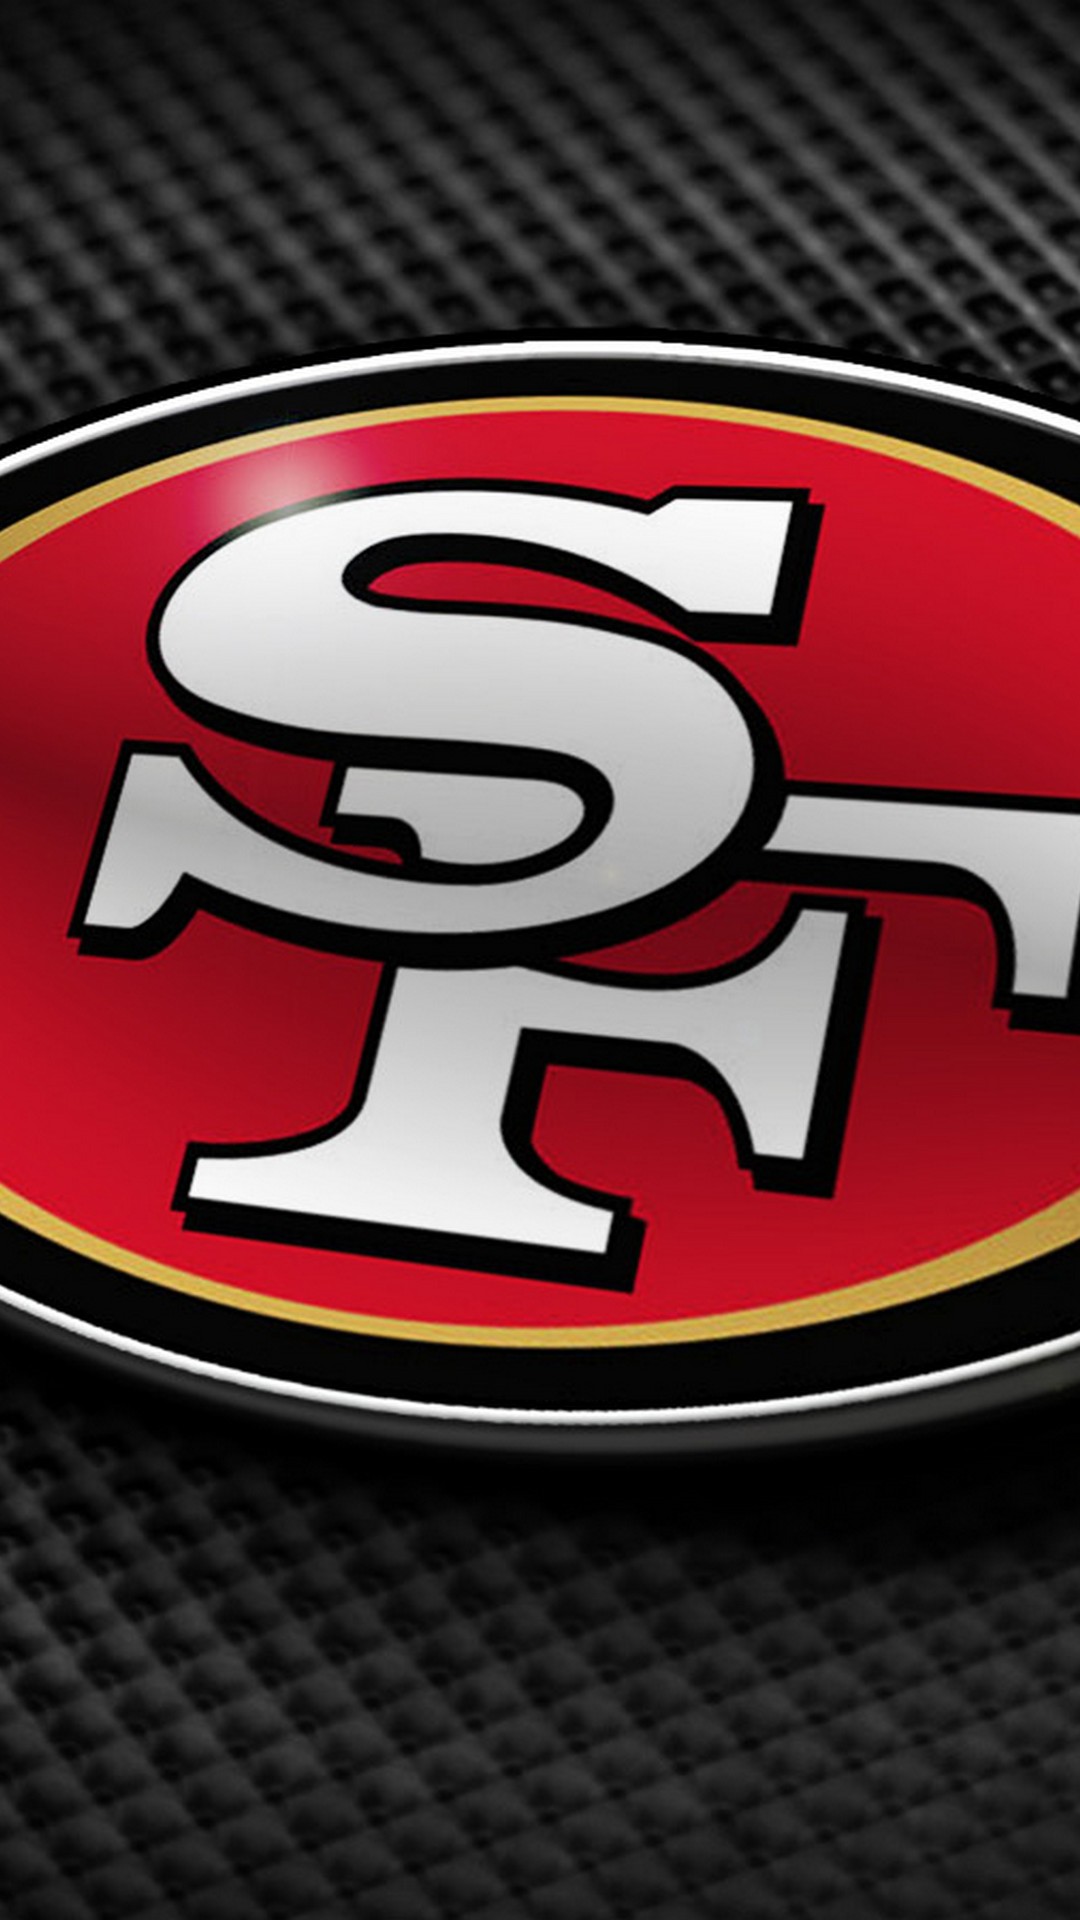 49ers iPhone Wallpaper Home Screen with high-resolution 1080x1920 pixel. Download and set as wallpaper for Desktop Computer, Apple iPhone X, XS Max, XR, 8, 7, 6, SE, iPad, Android